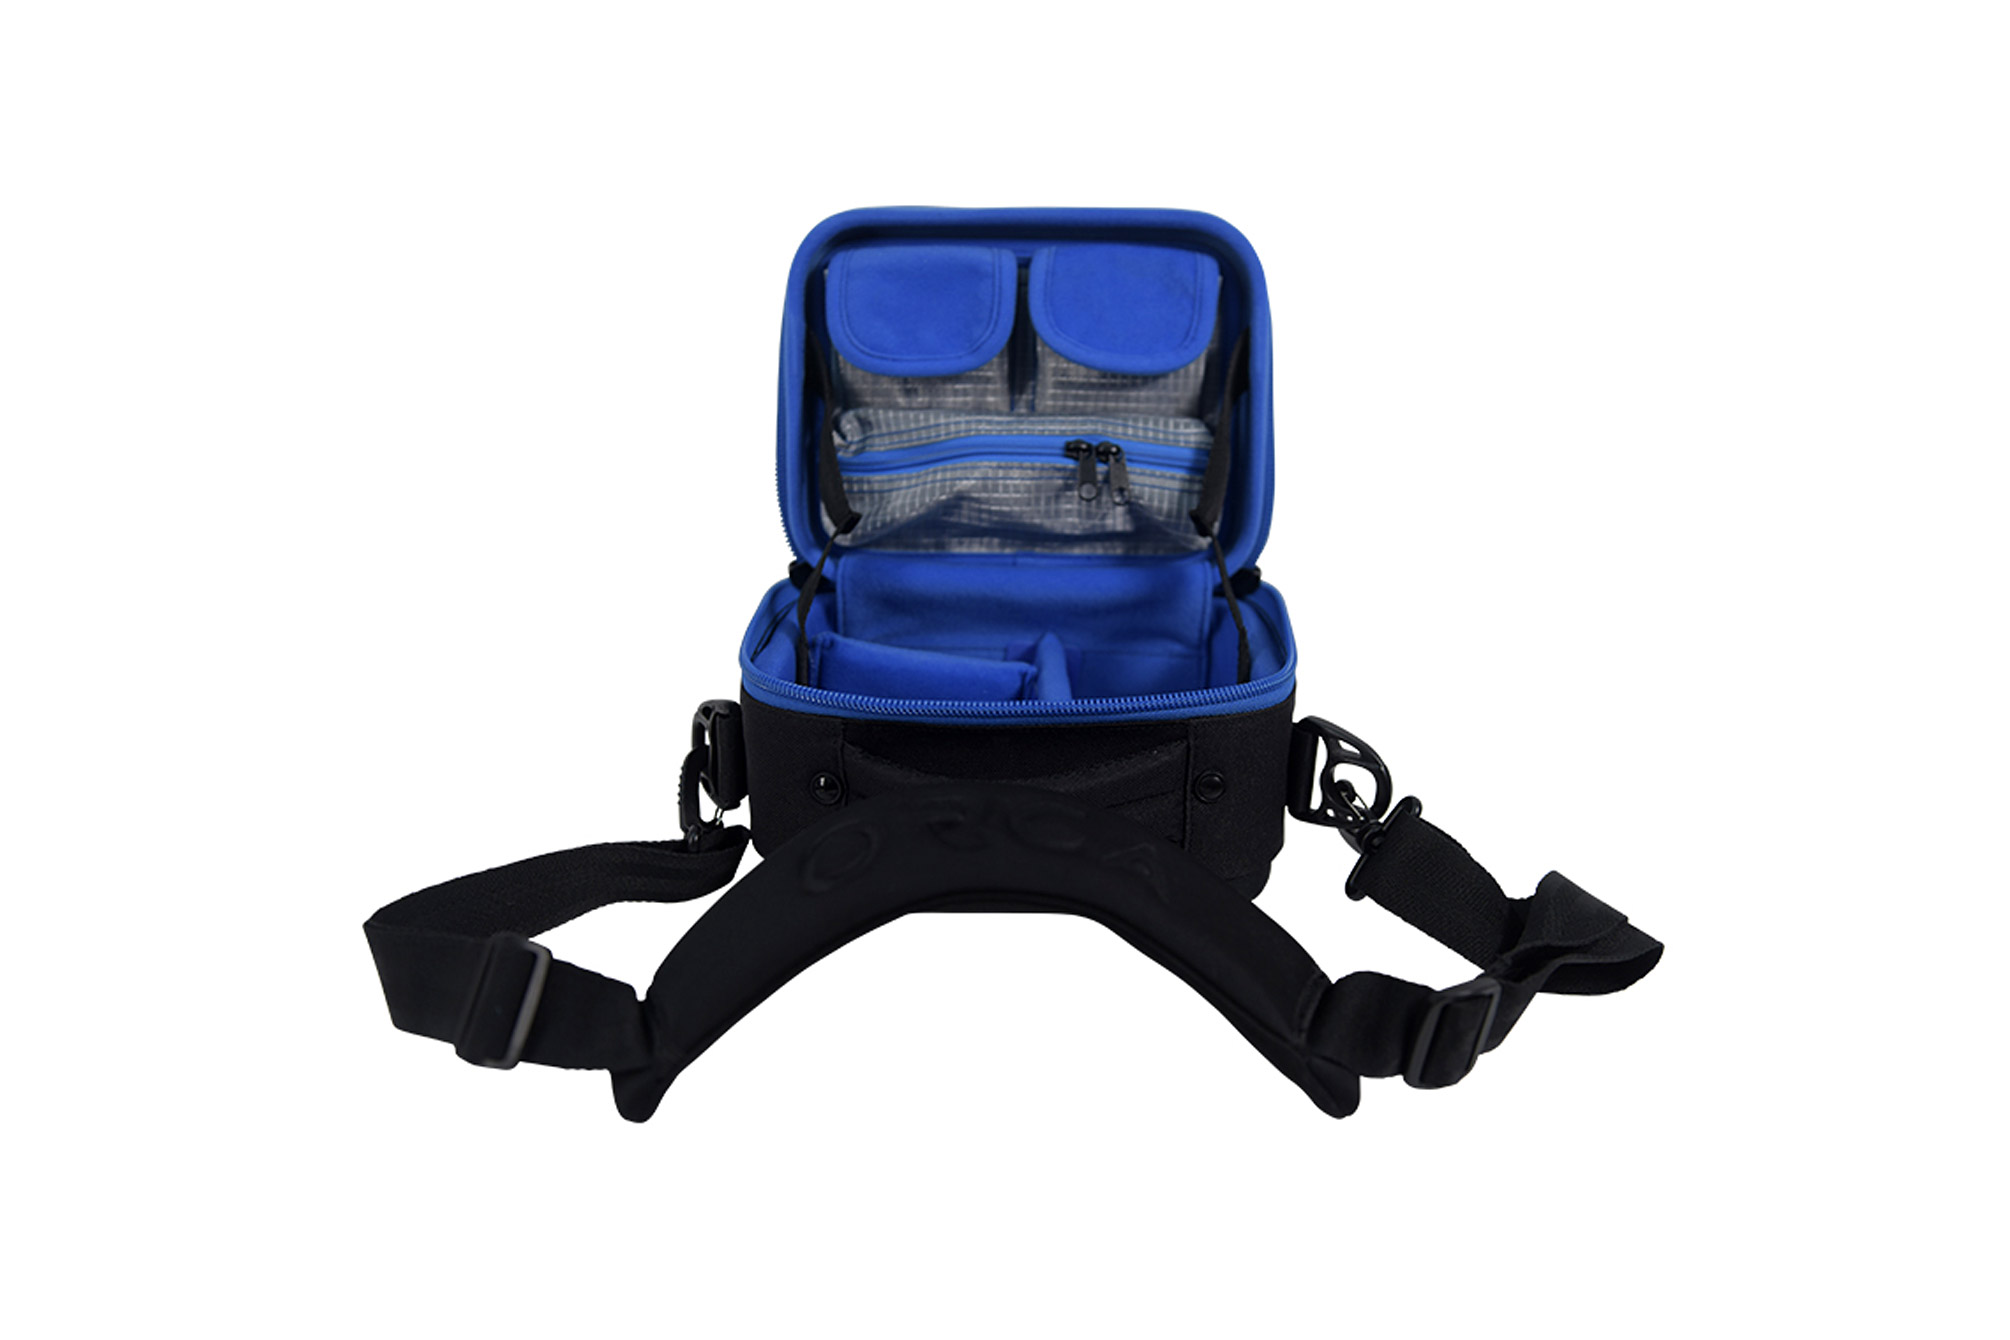 Orca OR-66 Hard Shell Accessories Bag - XS